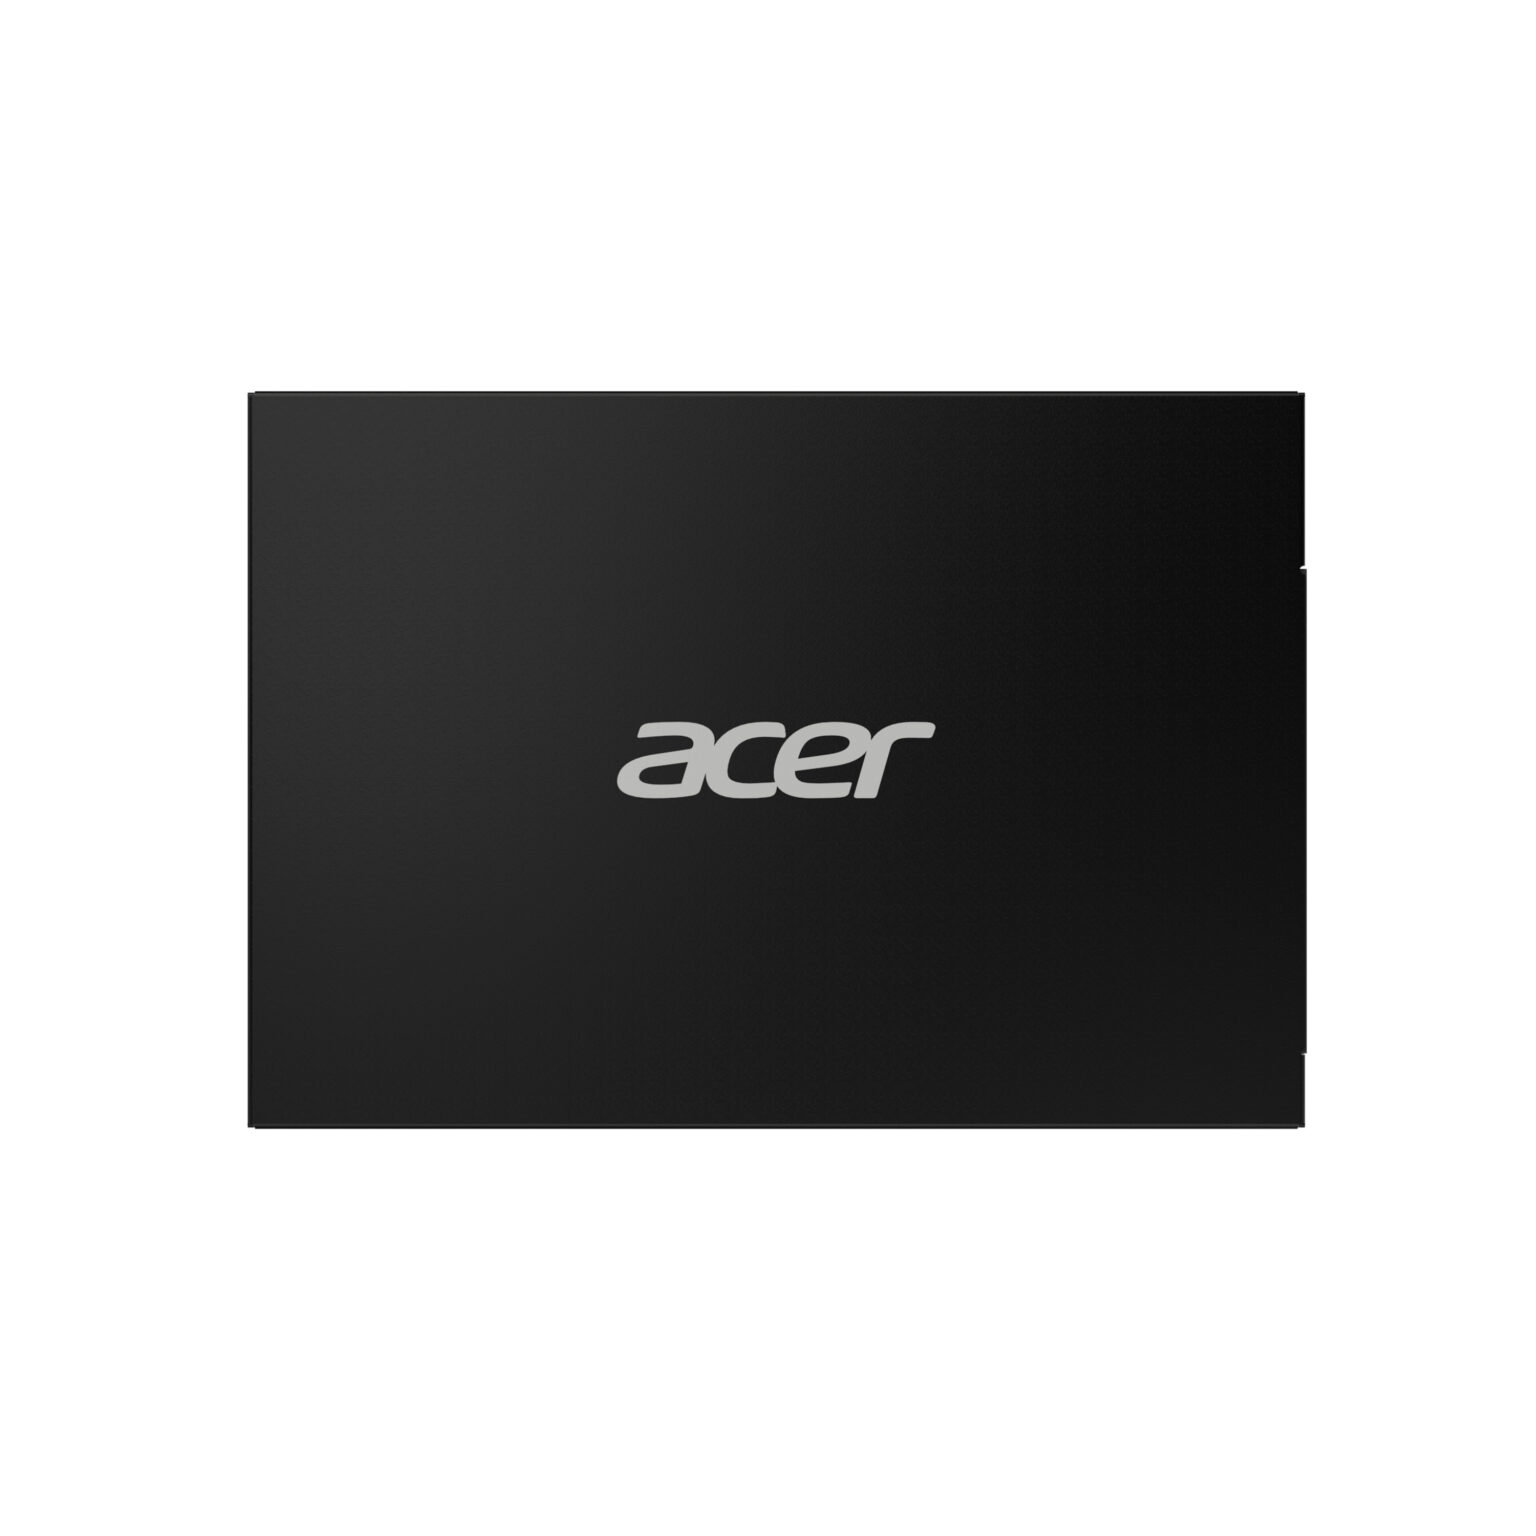 ACER RE100 2.5 SATA III SSD 512GB (1)